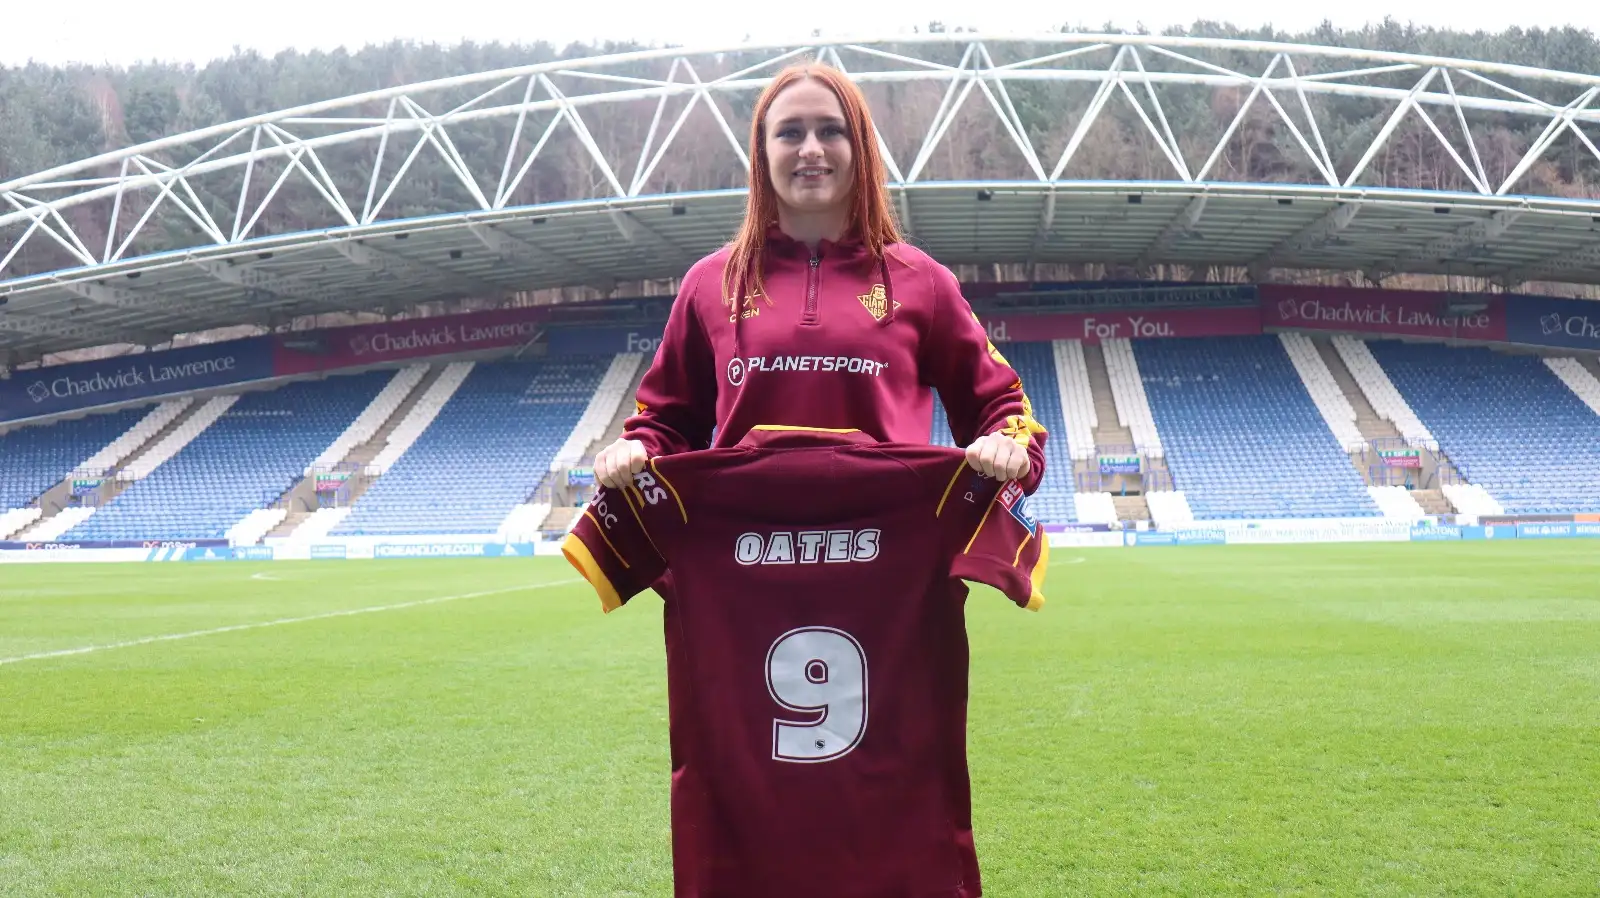 From Muay Thai to Super League, Huddersfield captain Bethan Oates keen to create Giants legacy